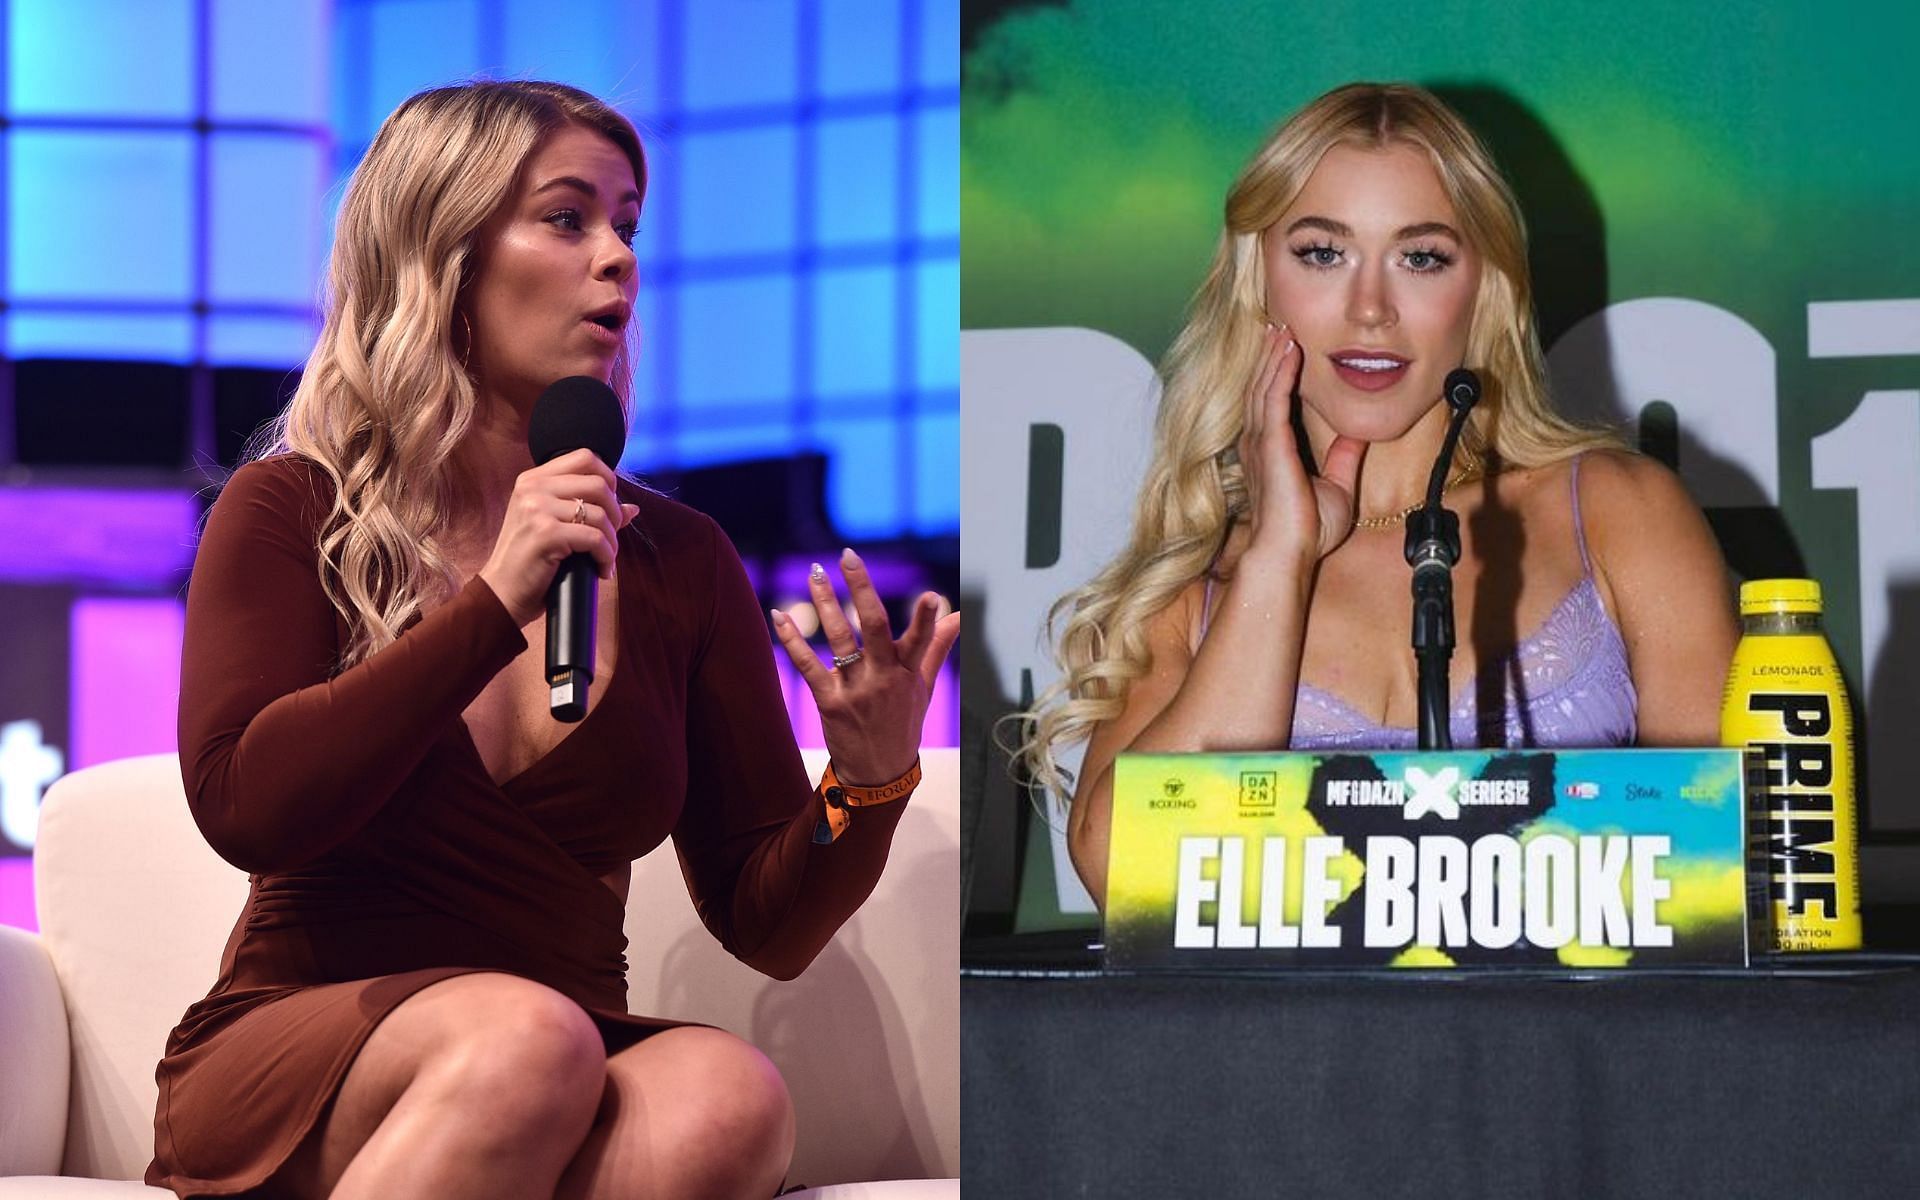 Paige VanZant (left) and Elle Brooke (right) will do battle in a championship clash at the MF &amp; DAZN: X Series 15 event [Images courtesy: Getty Images and @thedumbledong on Instagram]